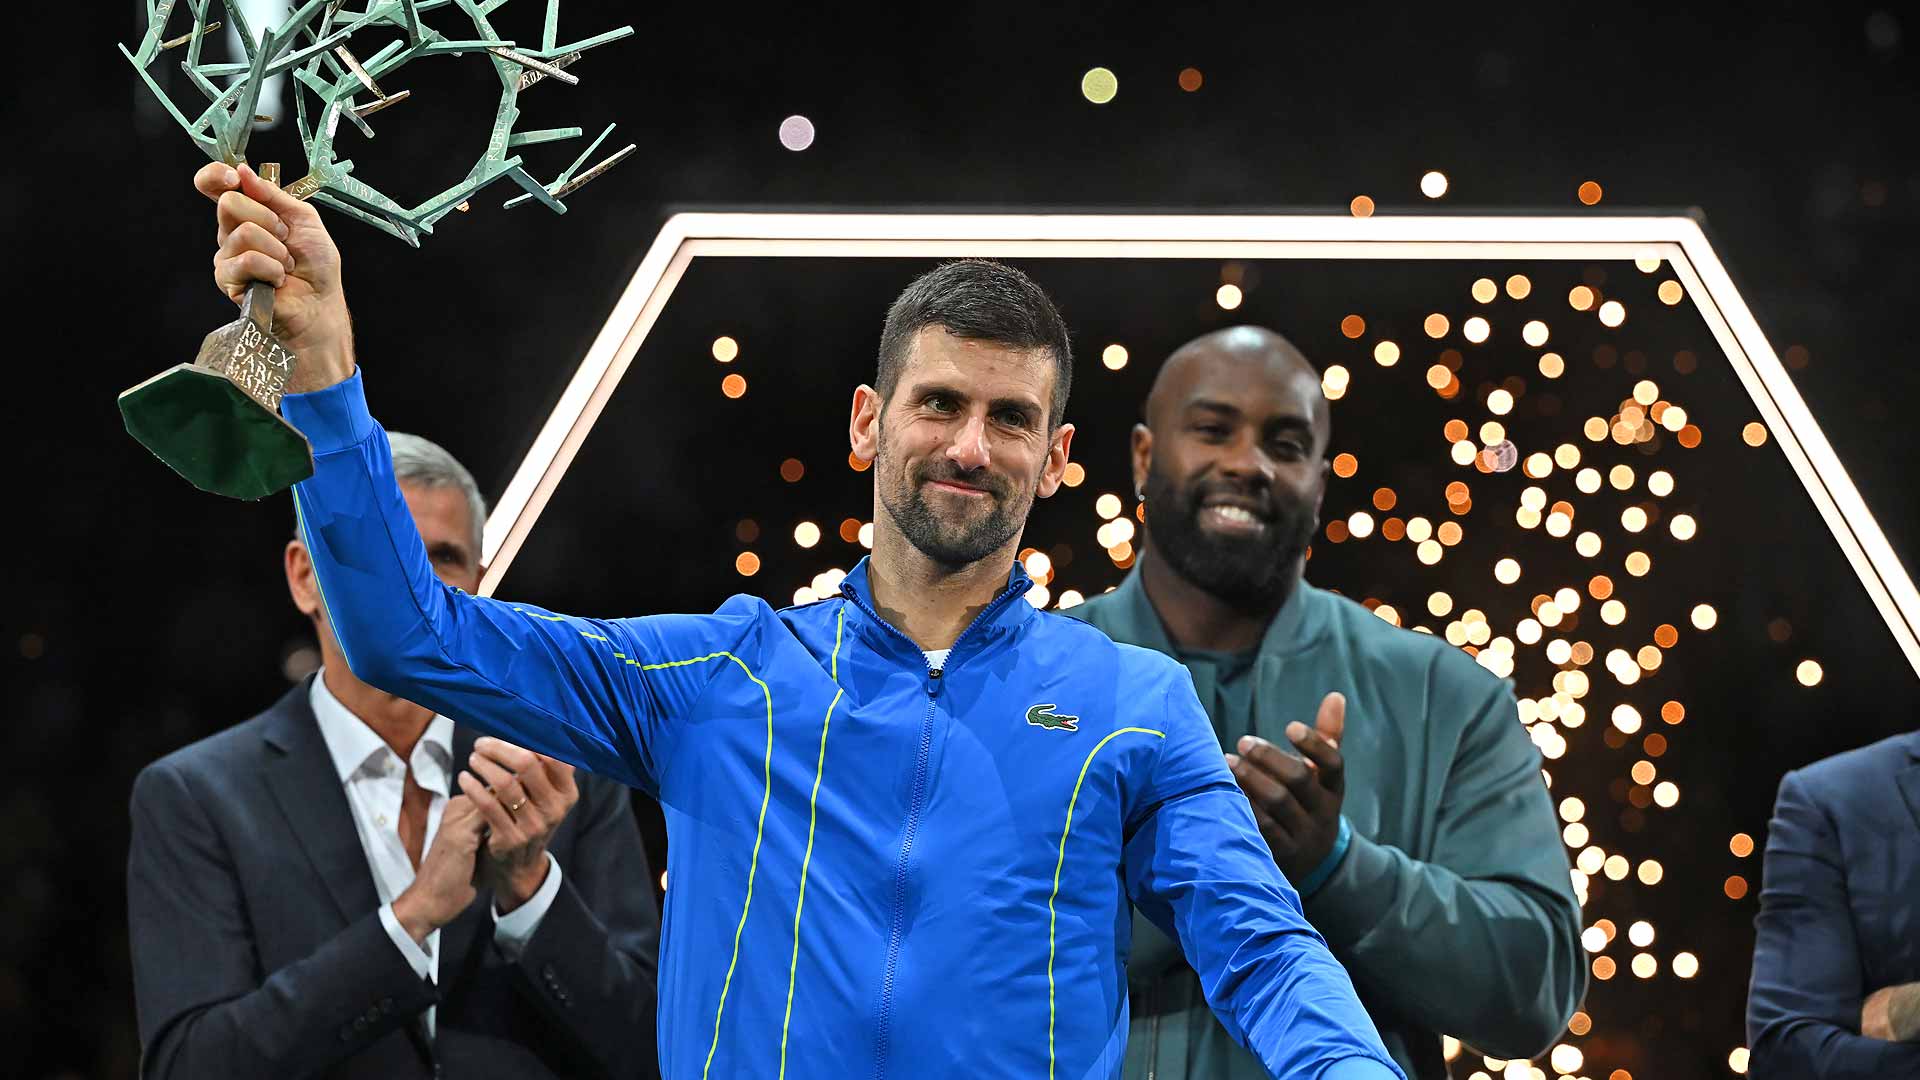 Novak Djokovic celebrates after receiving the Rolex Paris Masters trophy on Sunday from French Olympic judoka Teddy Riner.